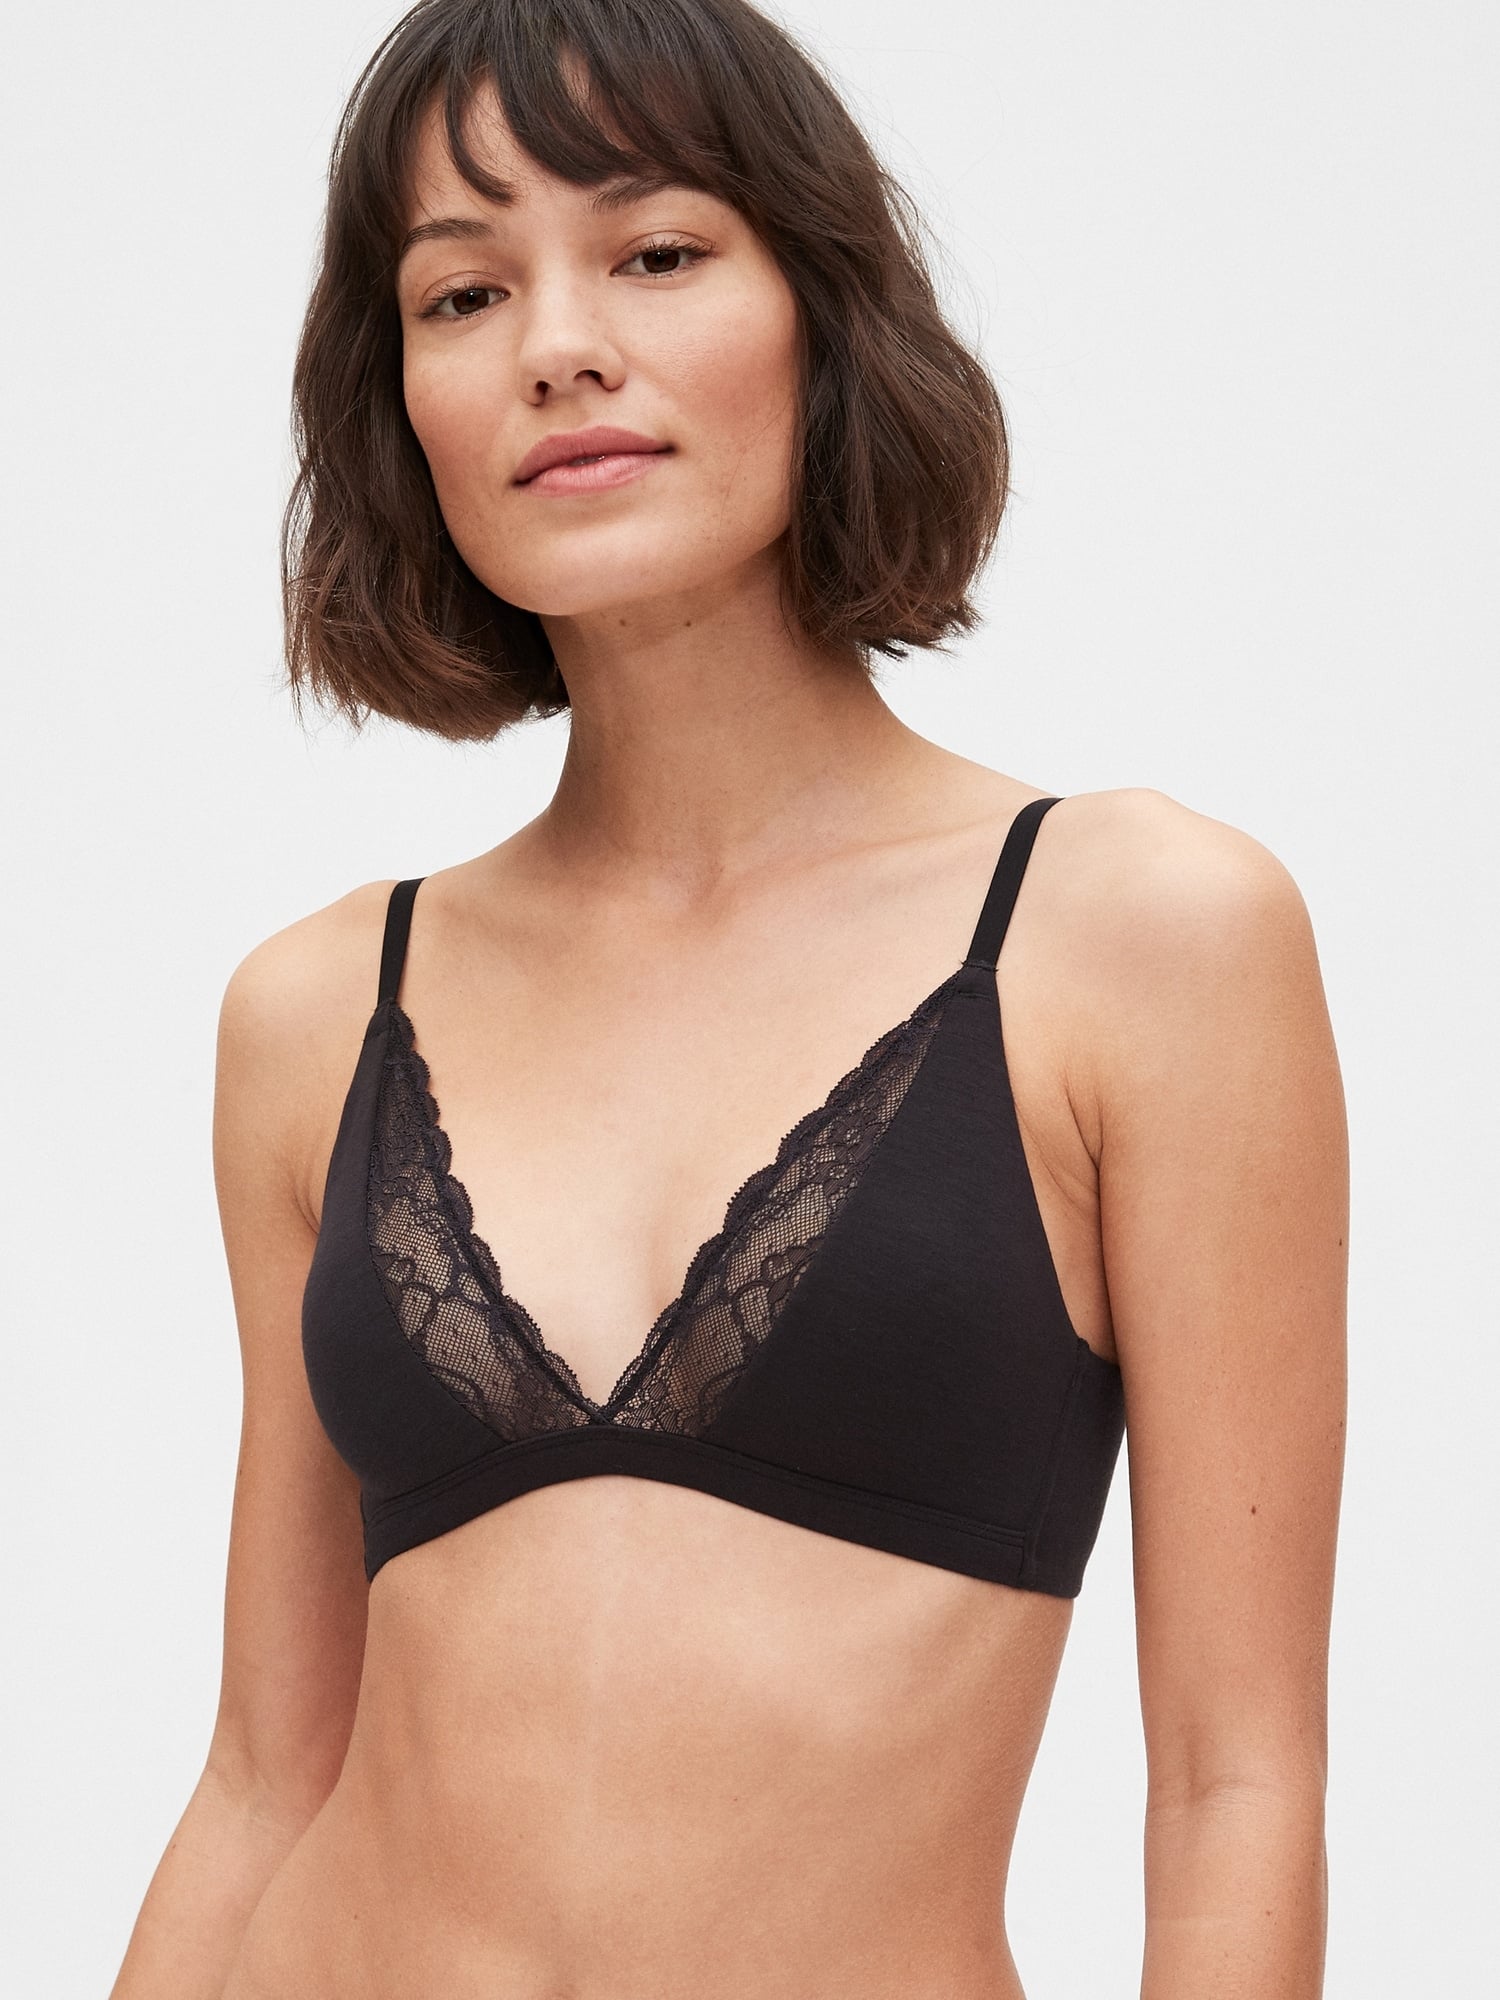 Gap Breathe Lace Plunge Bralette, This Brand Is Giving Us Everyday Romance  With Valentine's Day Lingerie